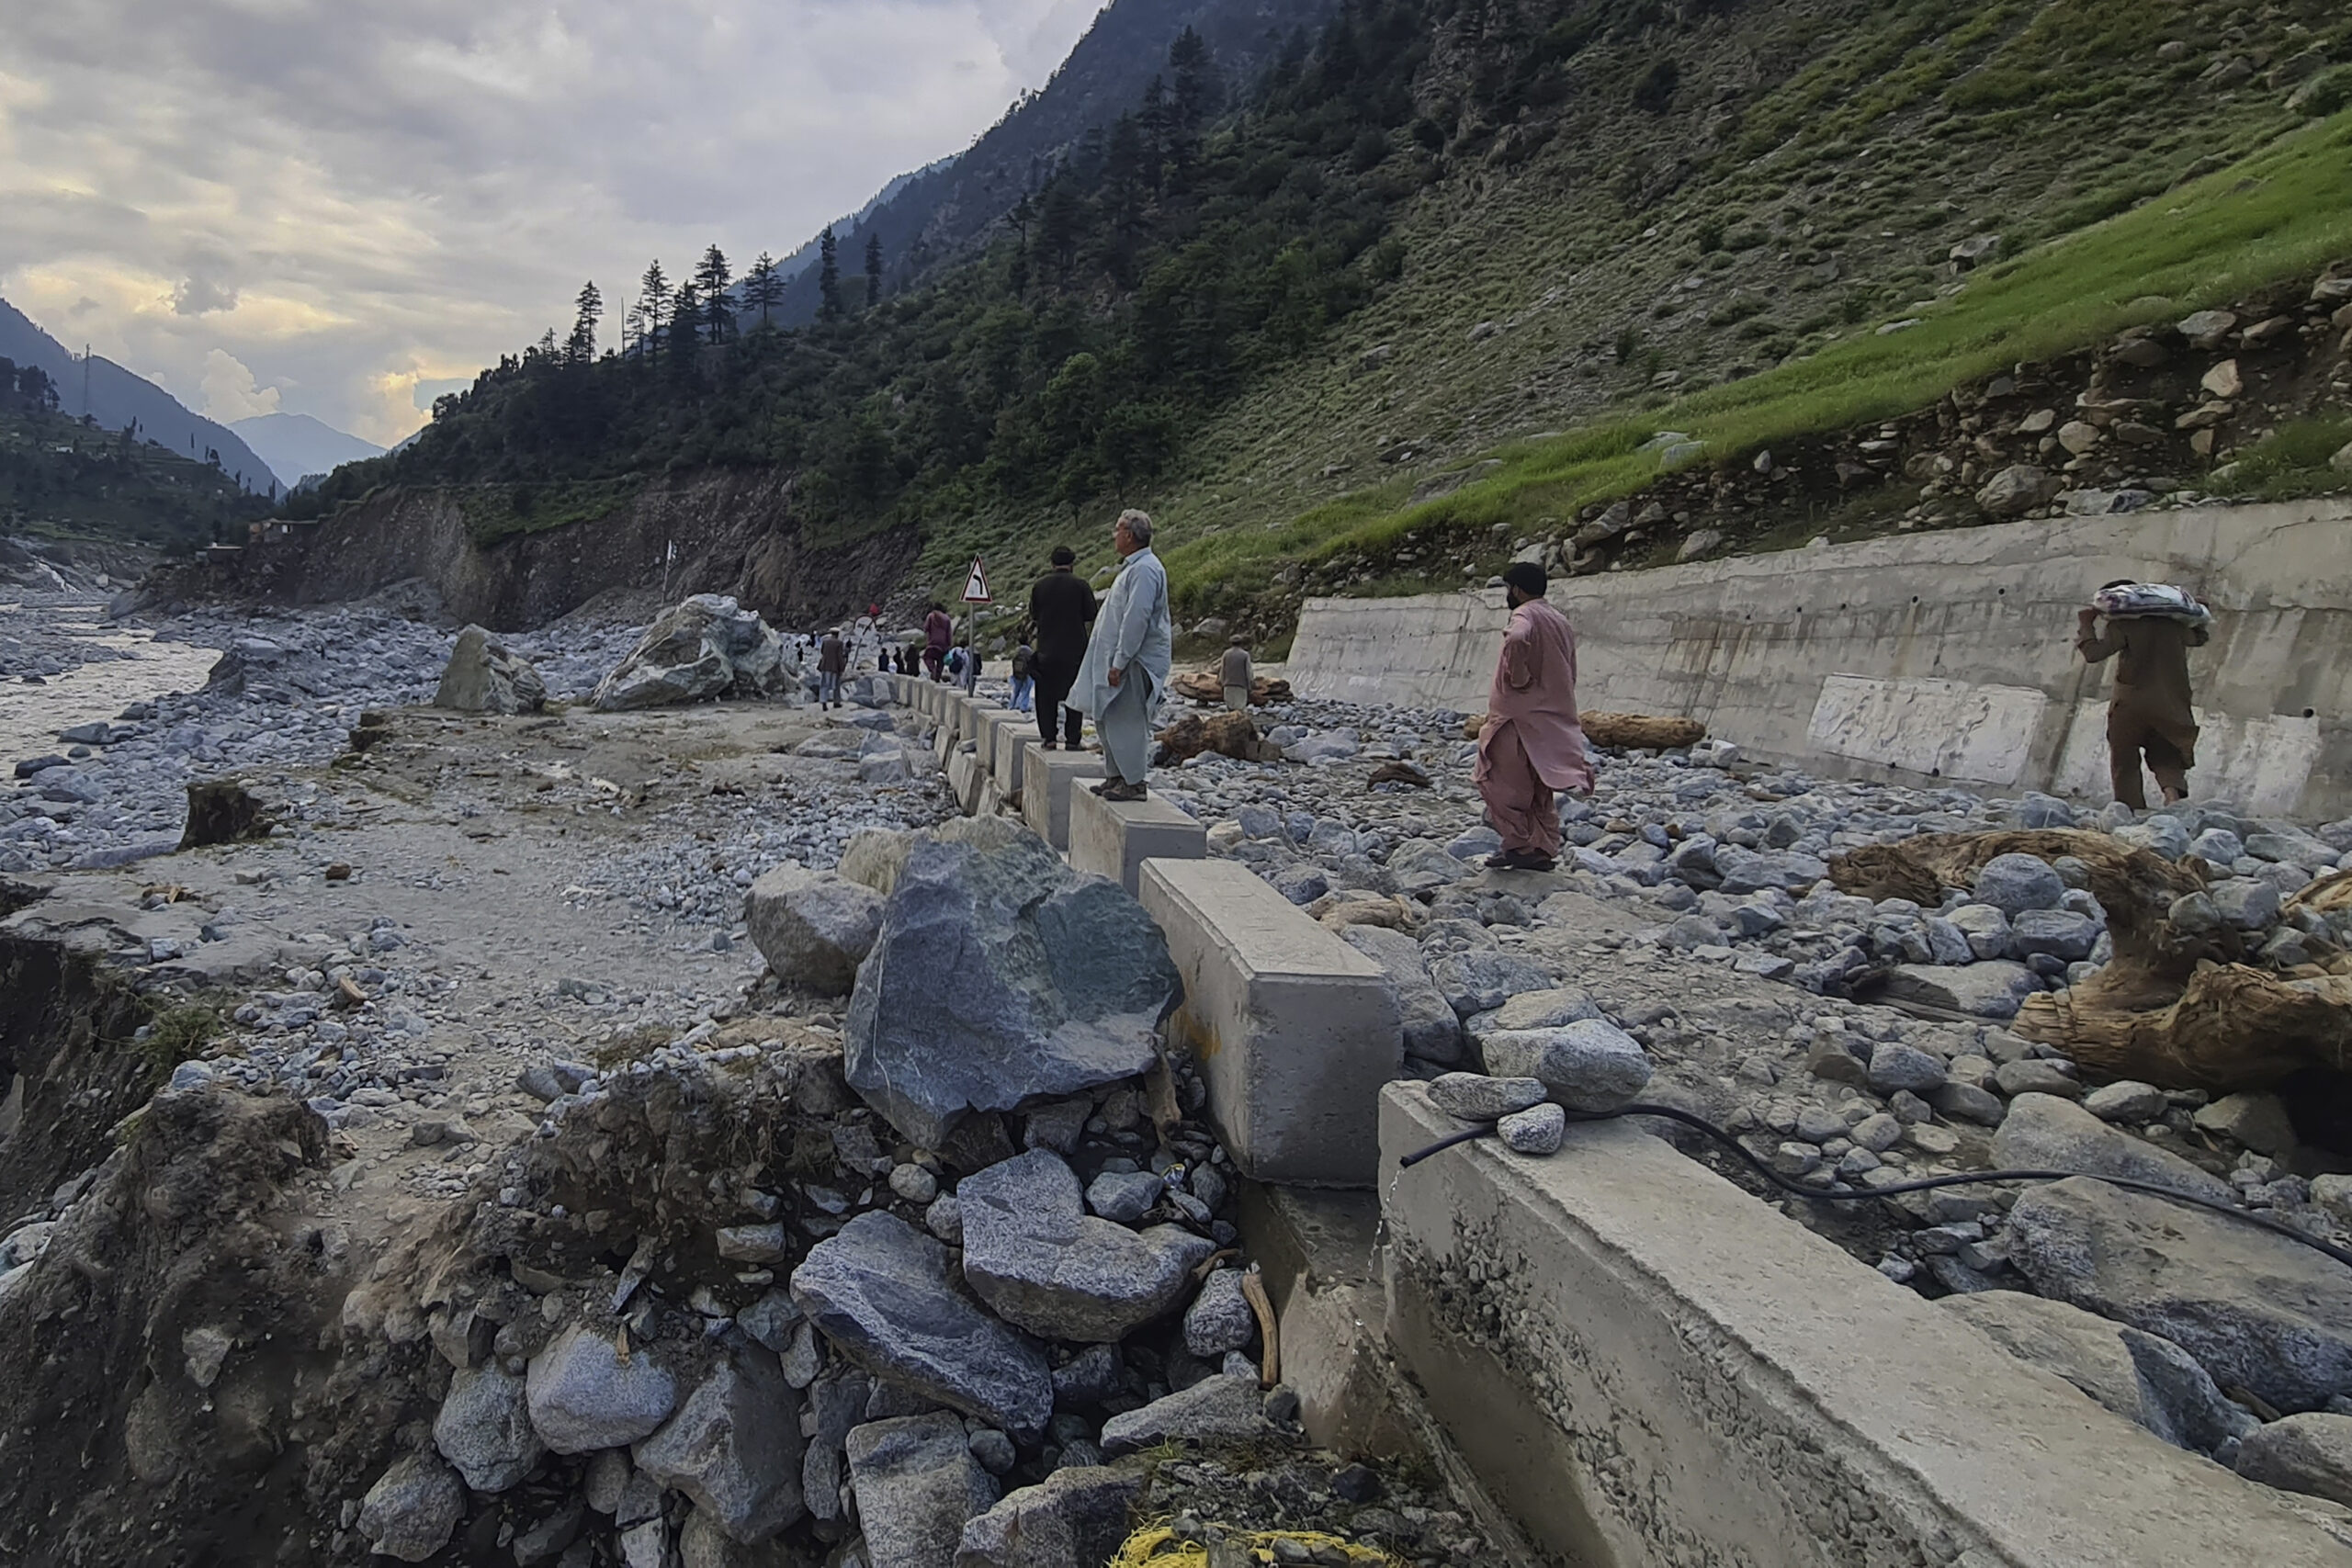 Local residents examine a portion of a road destroyed by floodwaters in the Kalam Valley in northern Pakistan, Tuesday, Aug. 30, 2022. Officials in Pakistan raised concerns Wednesday over the spread of waterborne diseases among thousands of flood victims as flood waters from powerful monsoon rains began to recede in many parts of the country. (AP Photo/Sherin Zada)